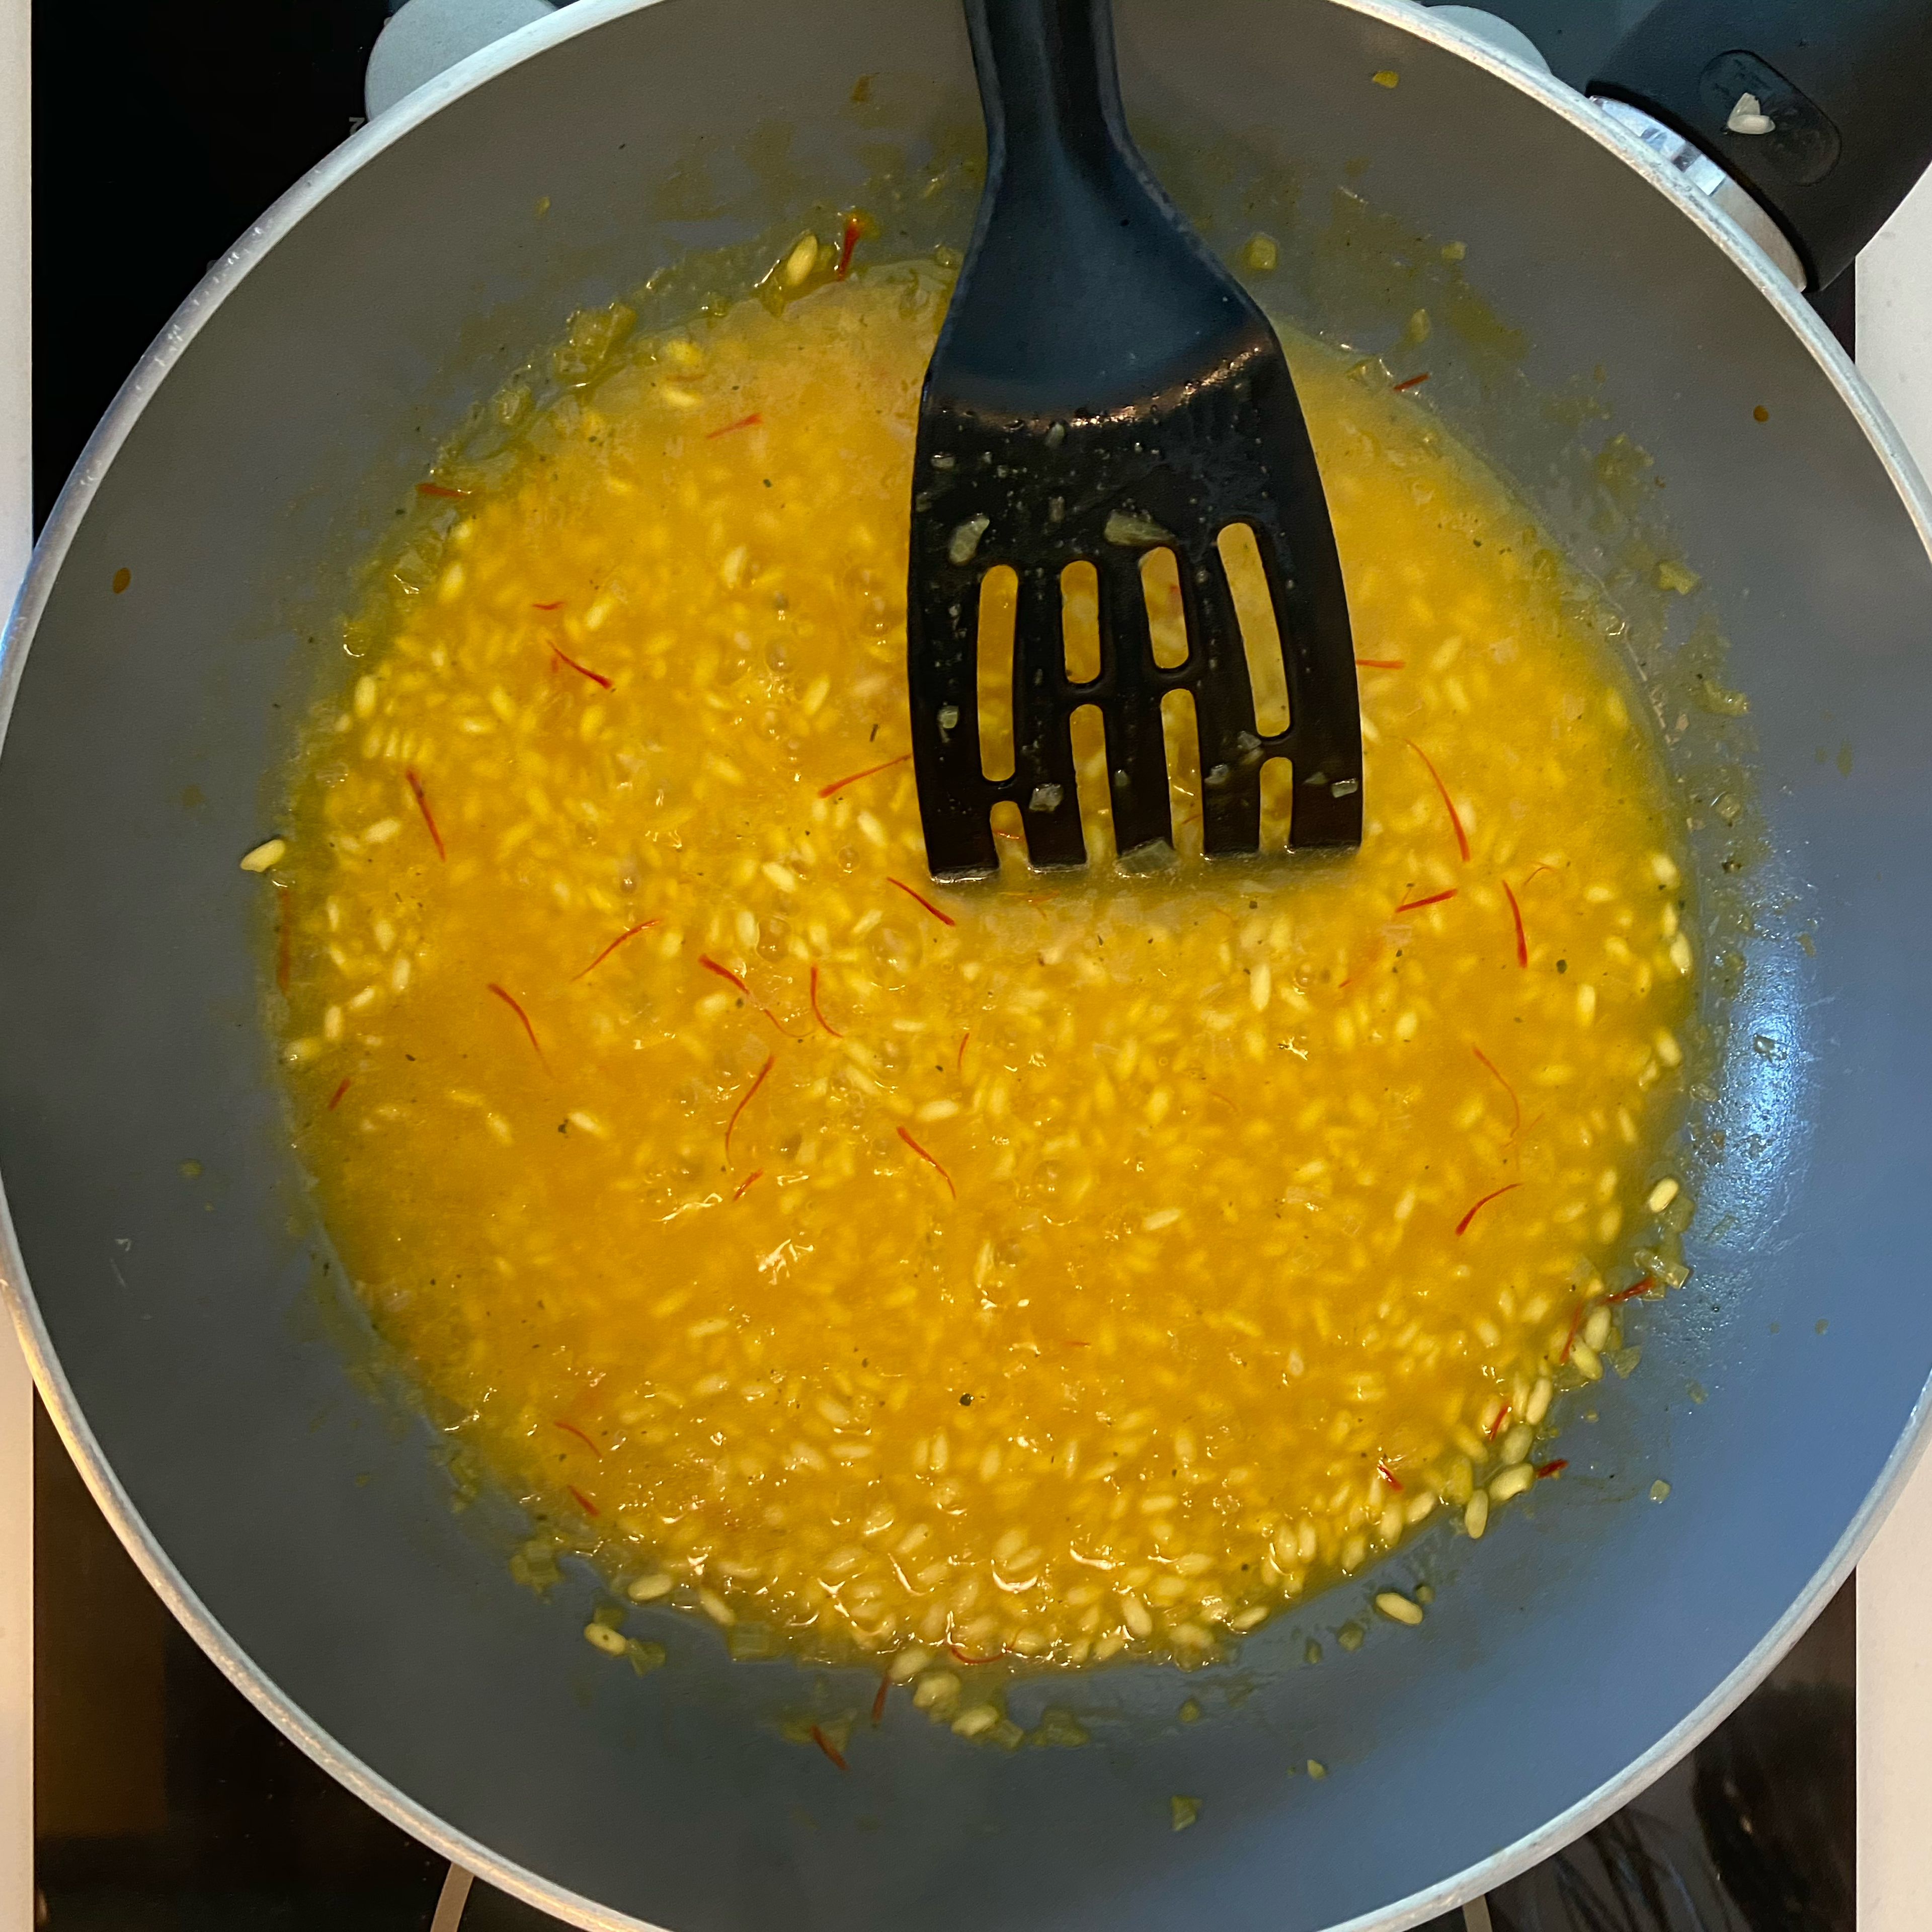 Once the shallot is stewed, pour the rice and toast it for 3-4 minutes, so the beans will seal and cook well. Pour in the white wine and let it evaporate completely. At this point add a half of the water with the saffron pistils that you have infused and then proceed with the cooking for about 18-20 minutes, adding the broth one ladle at a time, as needed, as it will be absorbed by the rice, the beans must always be covered with broth.